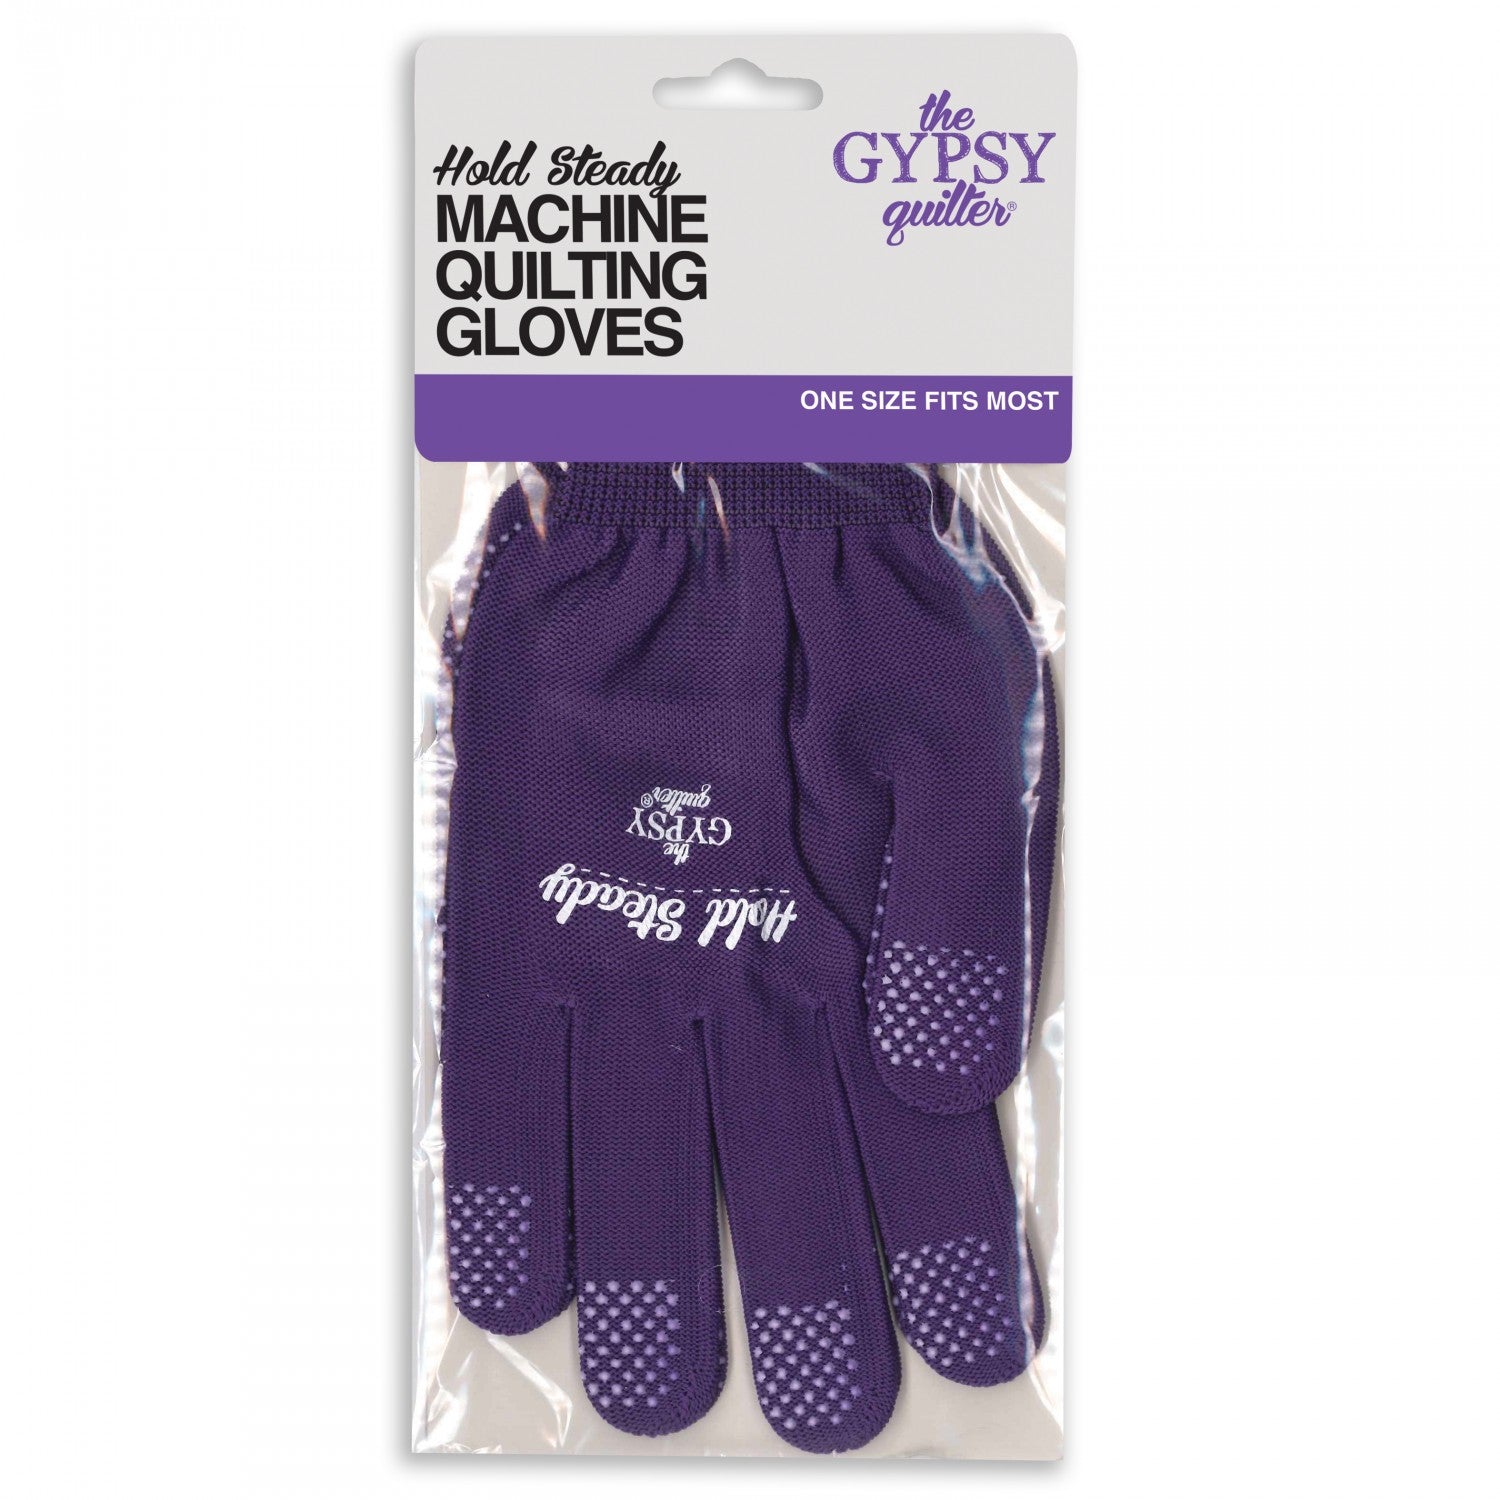 Quilters Touch - Machingers - Quilting Gloves - Medium/Large